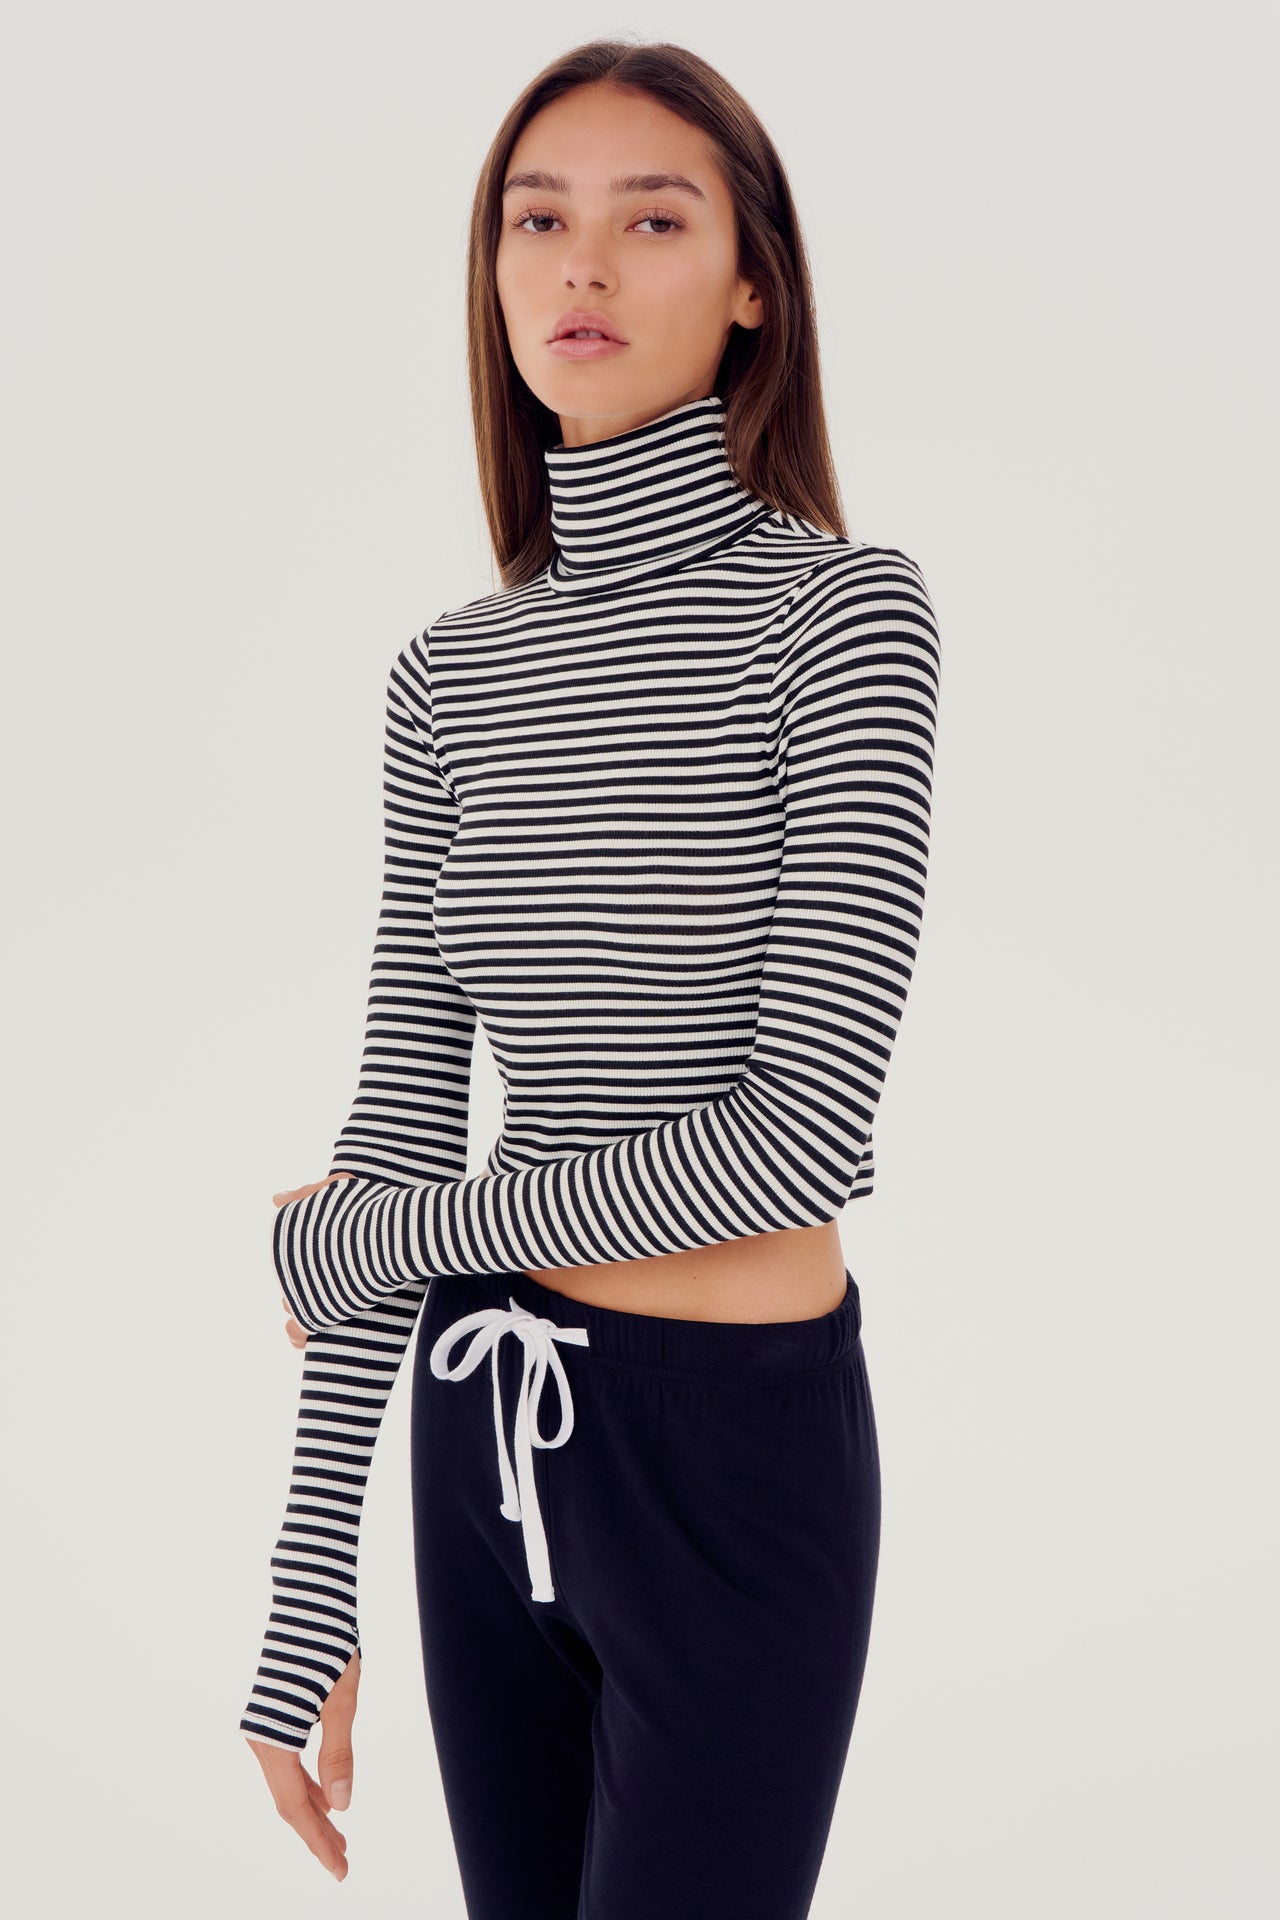 The model is wearing a black and white striped SPLITS59 Jackson Rib Cropped Turtleneck top.